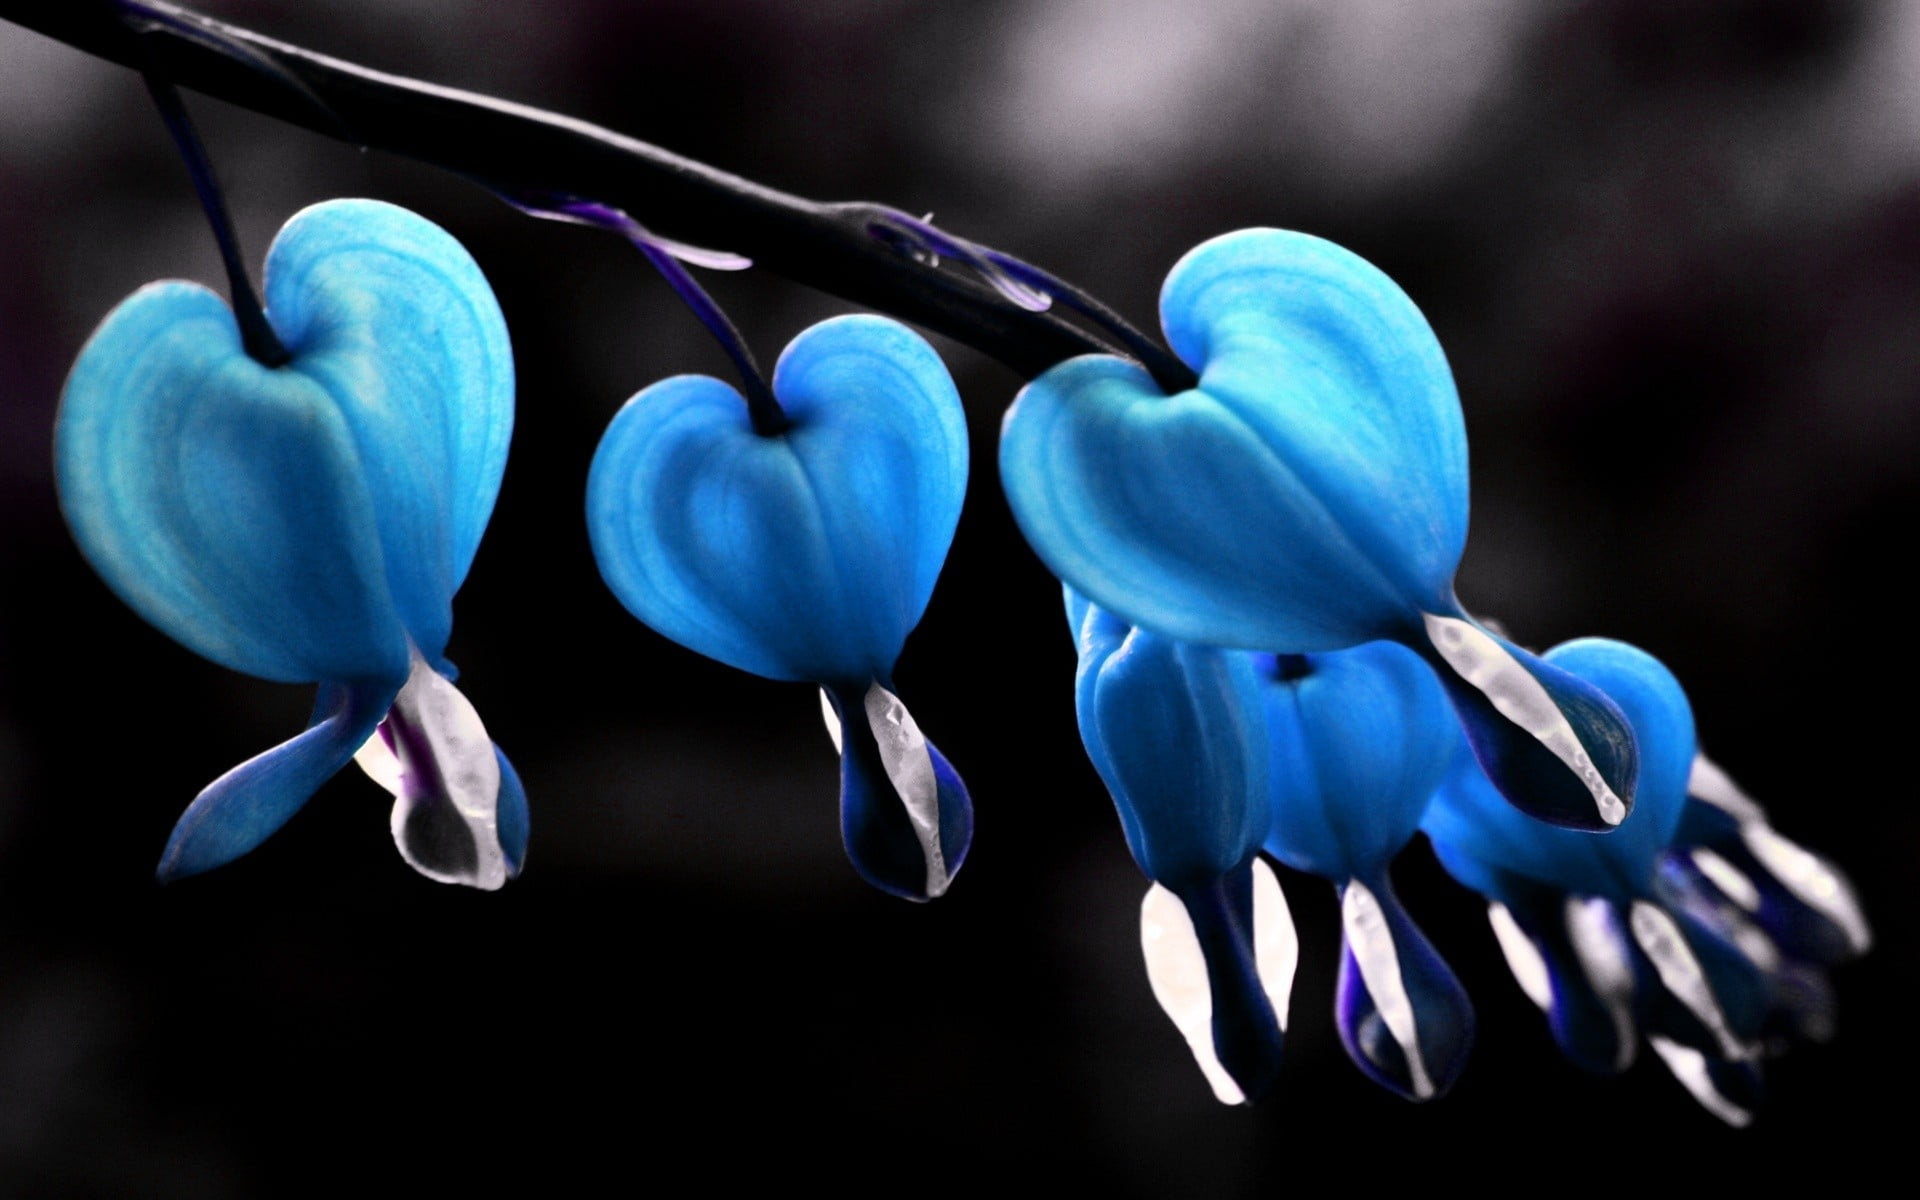 heart-shaped blue leafed with water dew close-up photography